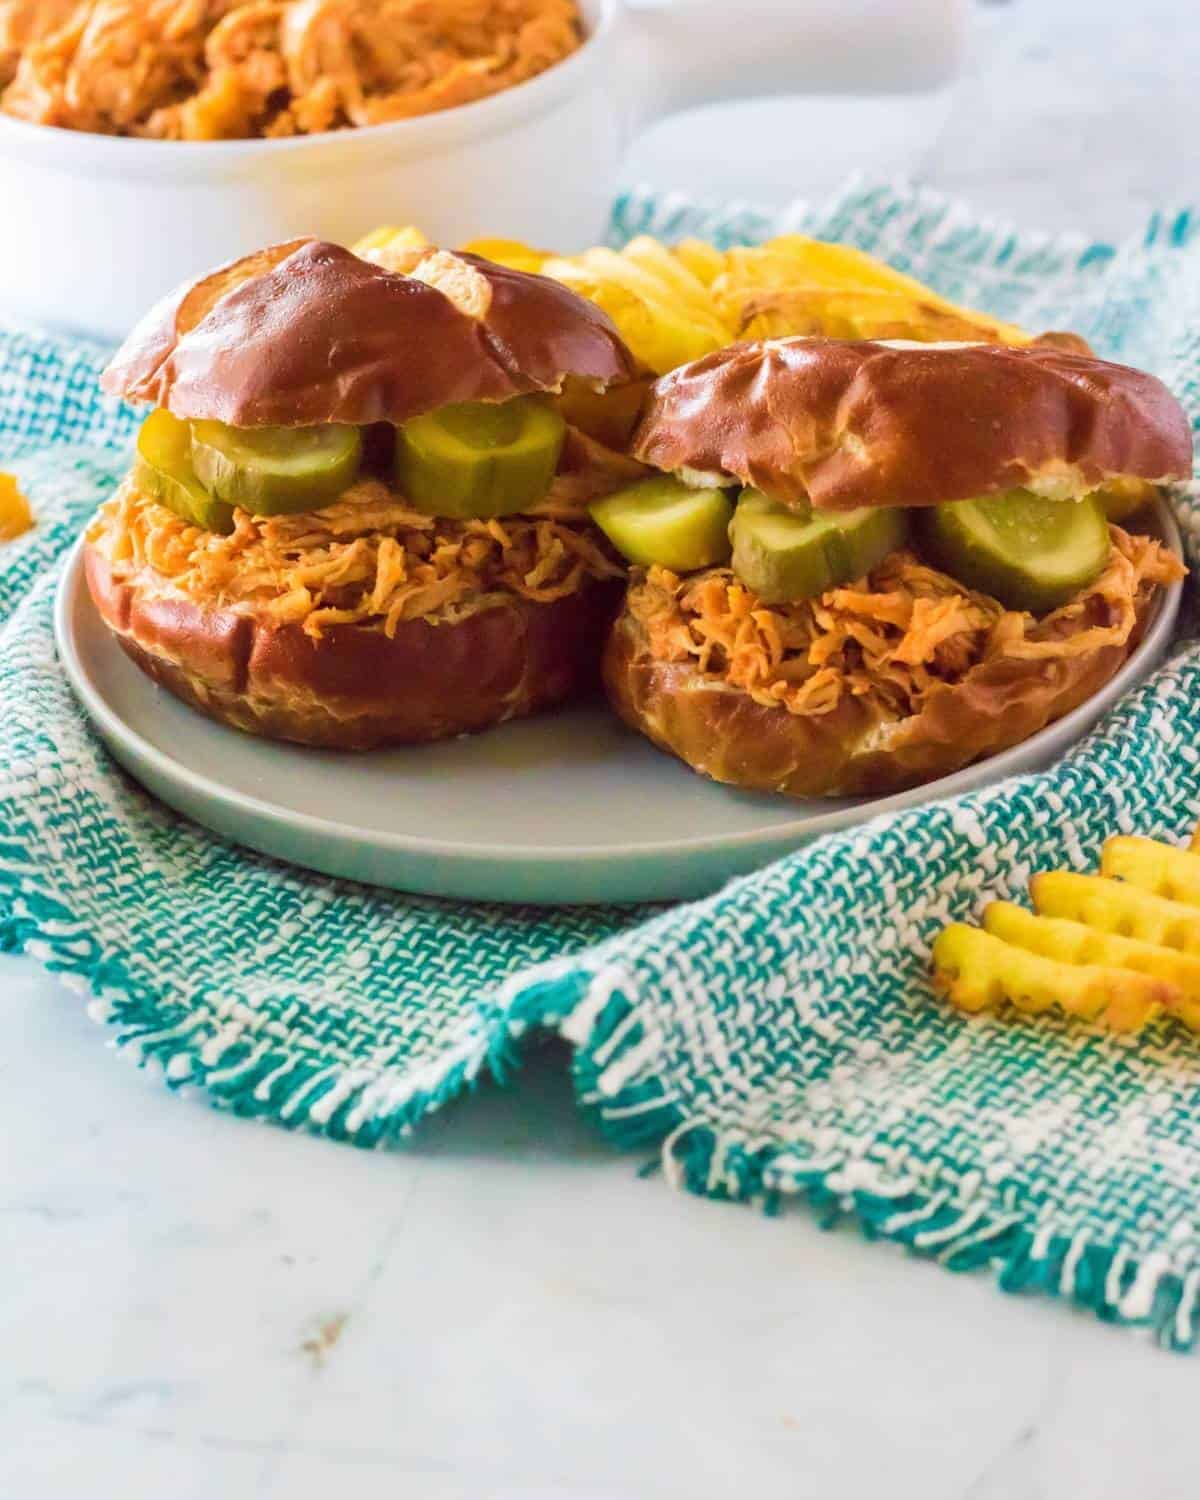 A shredded chicken sandwich on a pretzel bun topped with pickles.